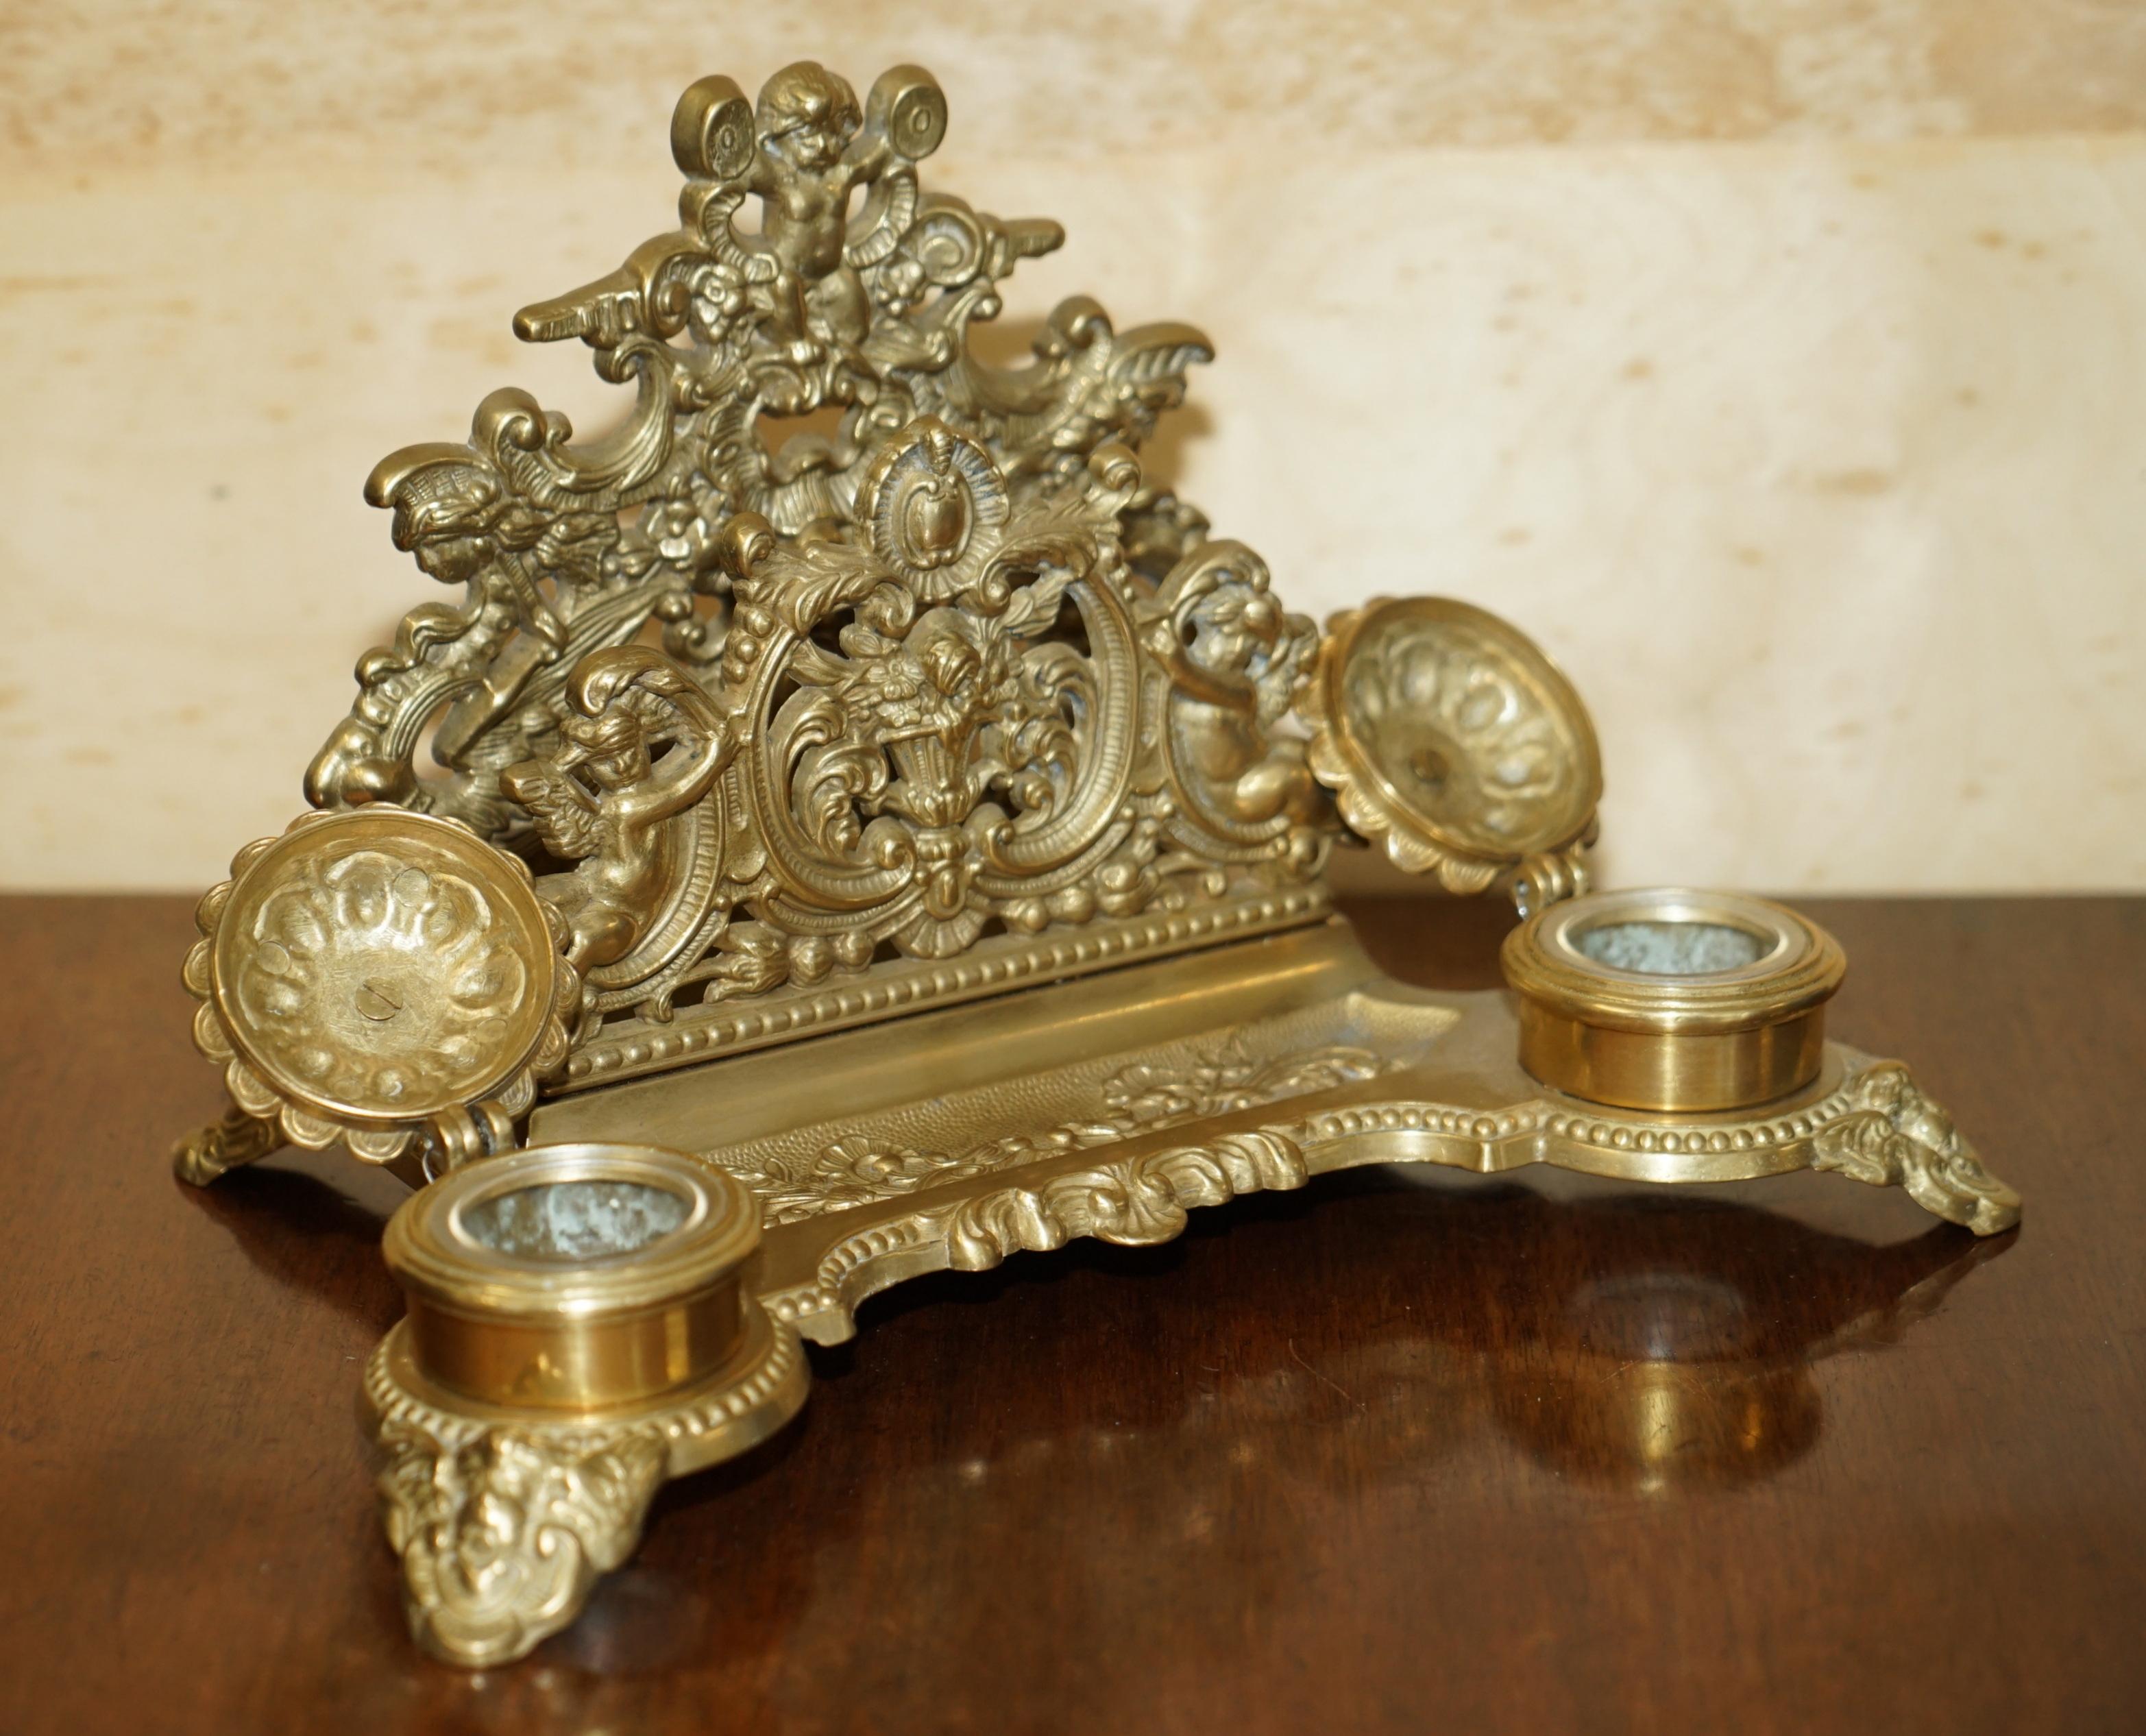 LOVELY ANTIQUE FRENCH BAROQUE REPOUSSE GiLT BRASS CHERUB INKWELL LETTER STAND For Sale 13